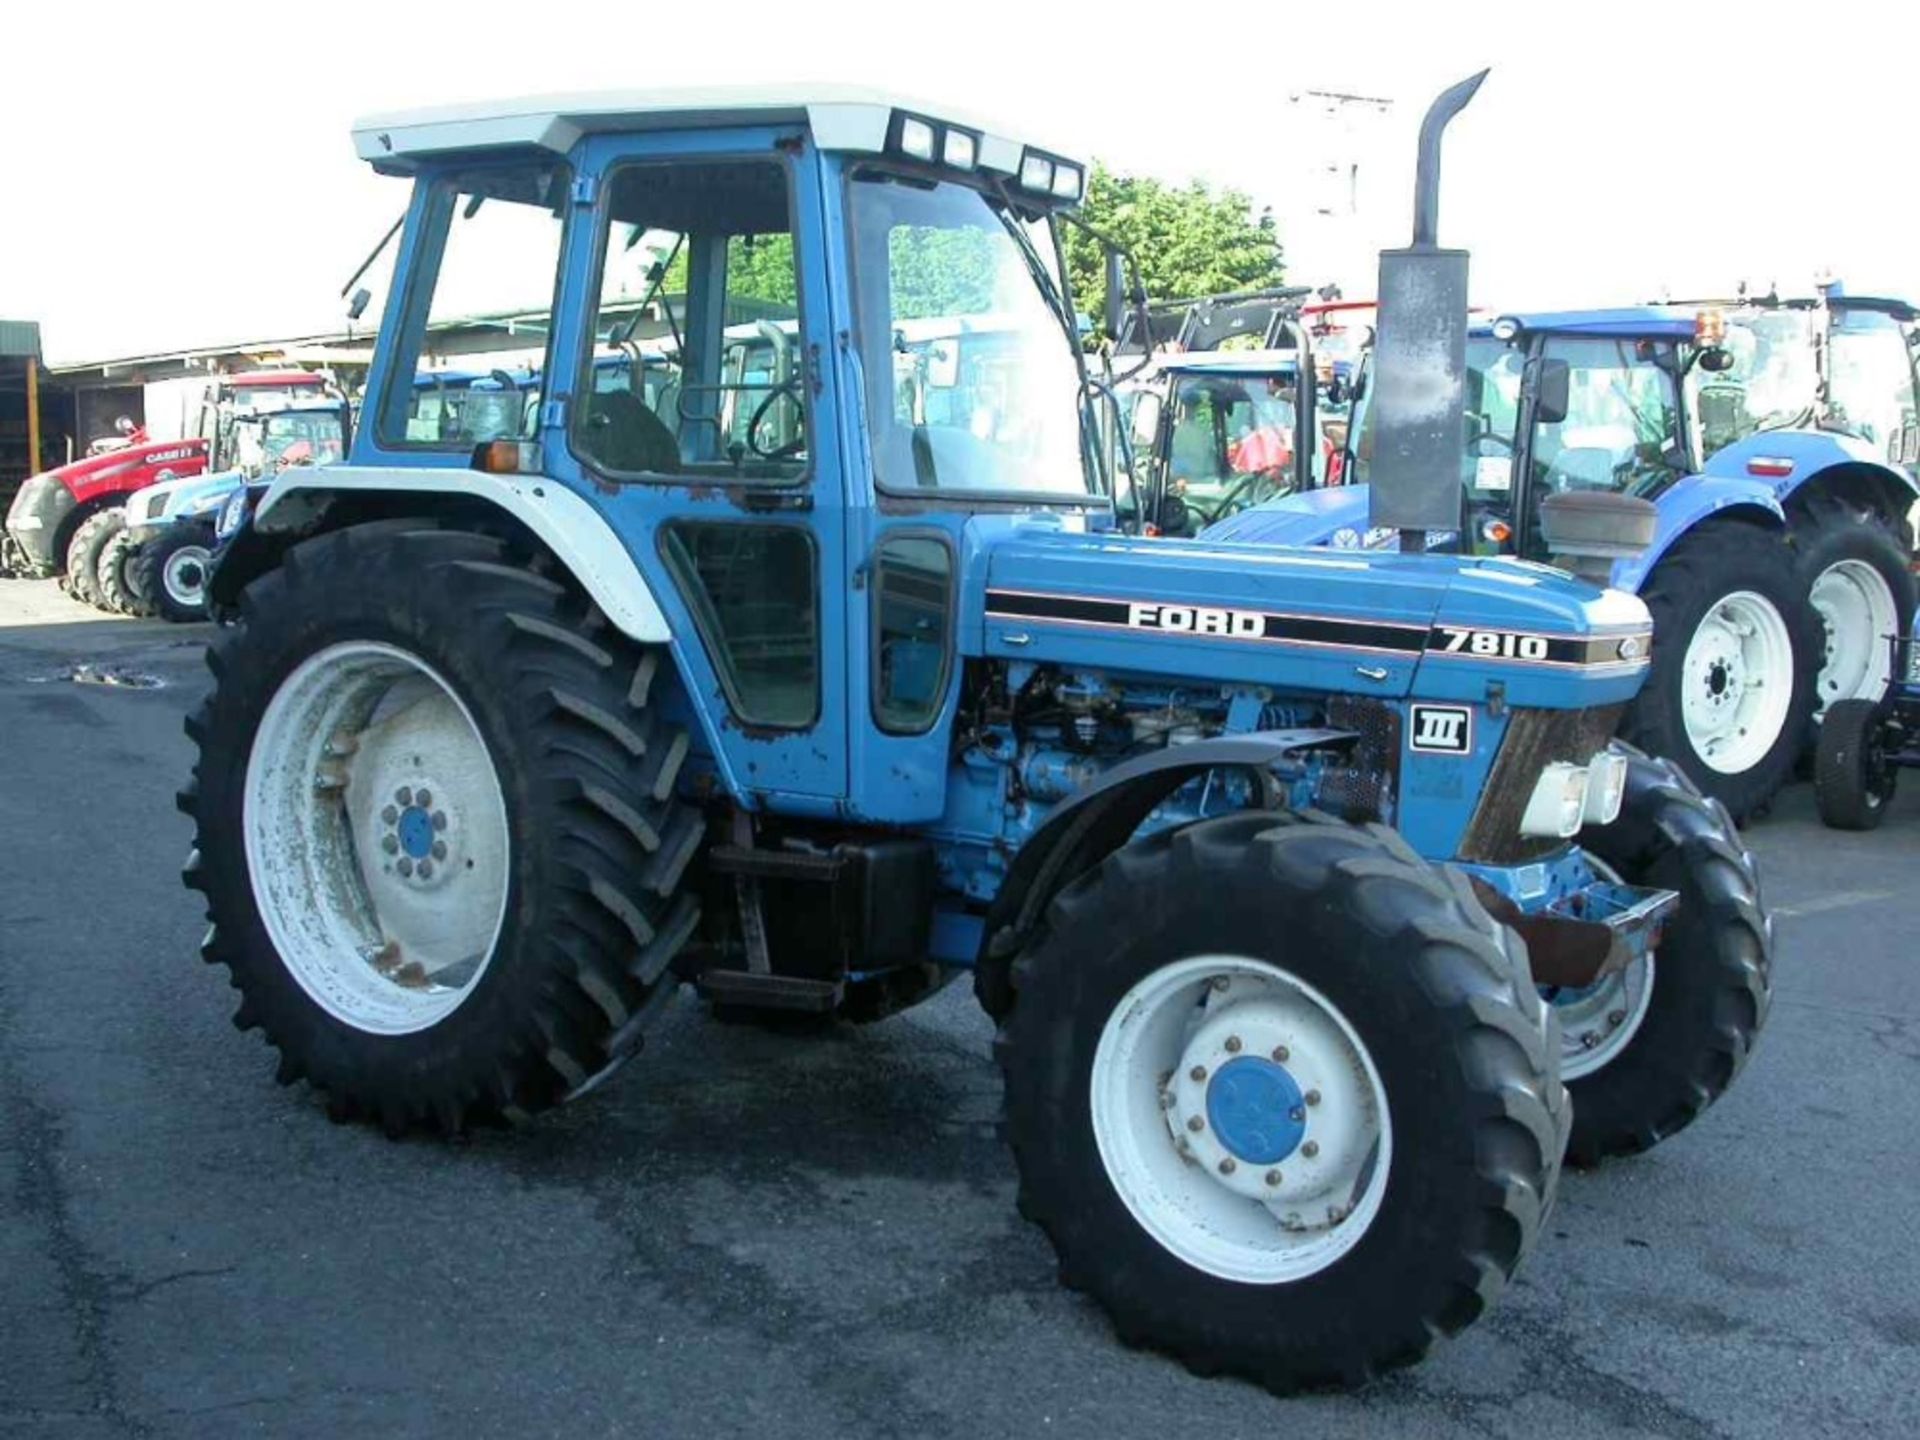 1991 Ford 7810 4wd Tractor - Image 3 of 8